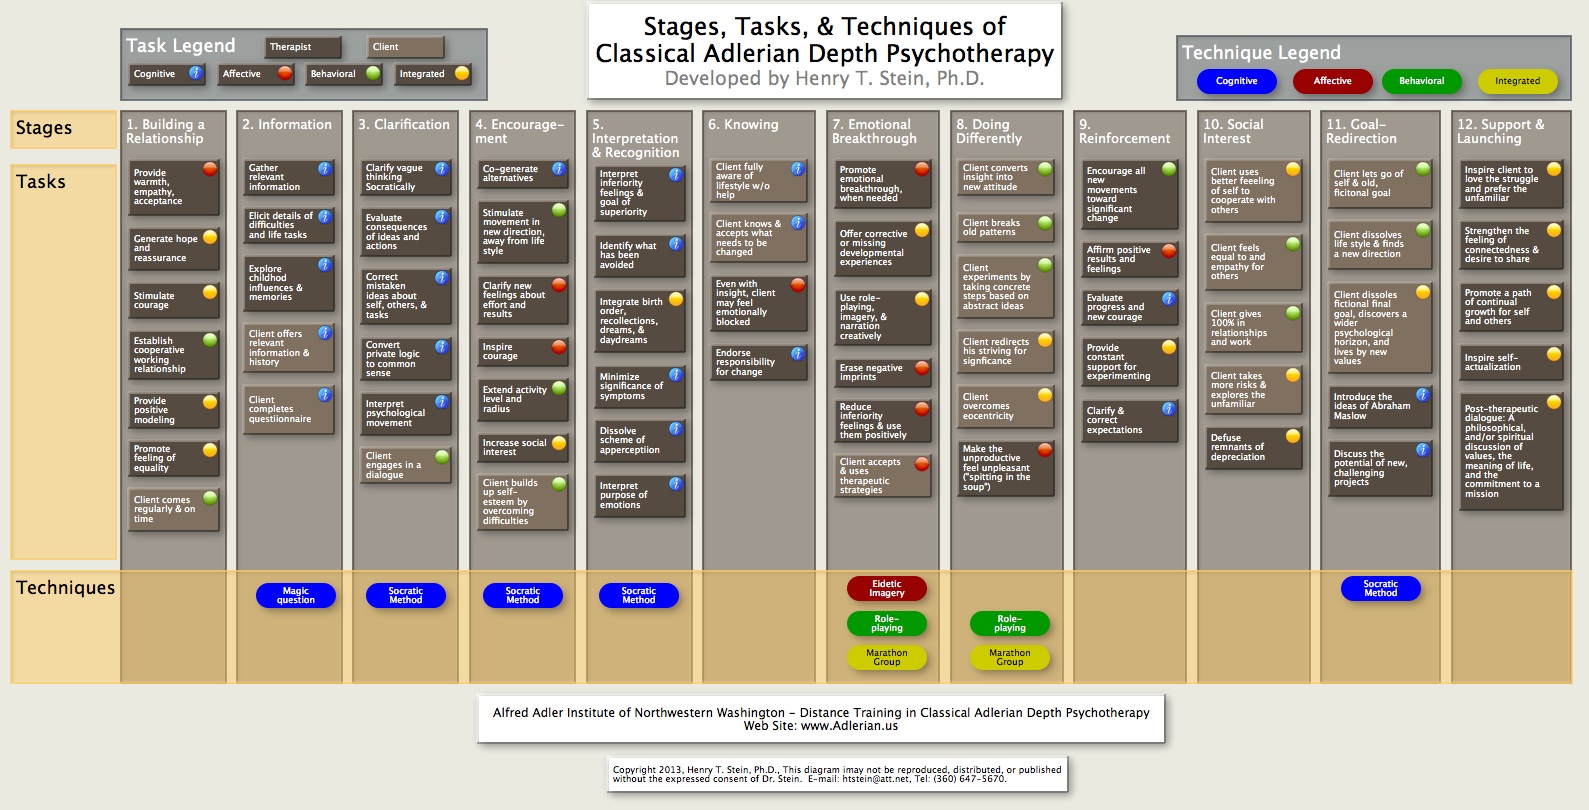 Stages and Tasks of CADP